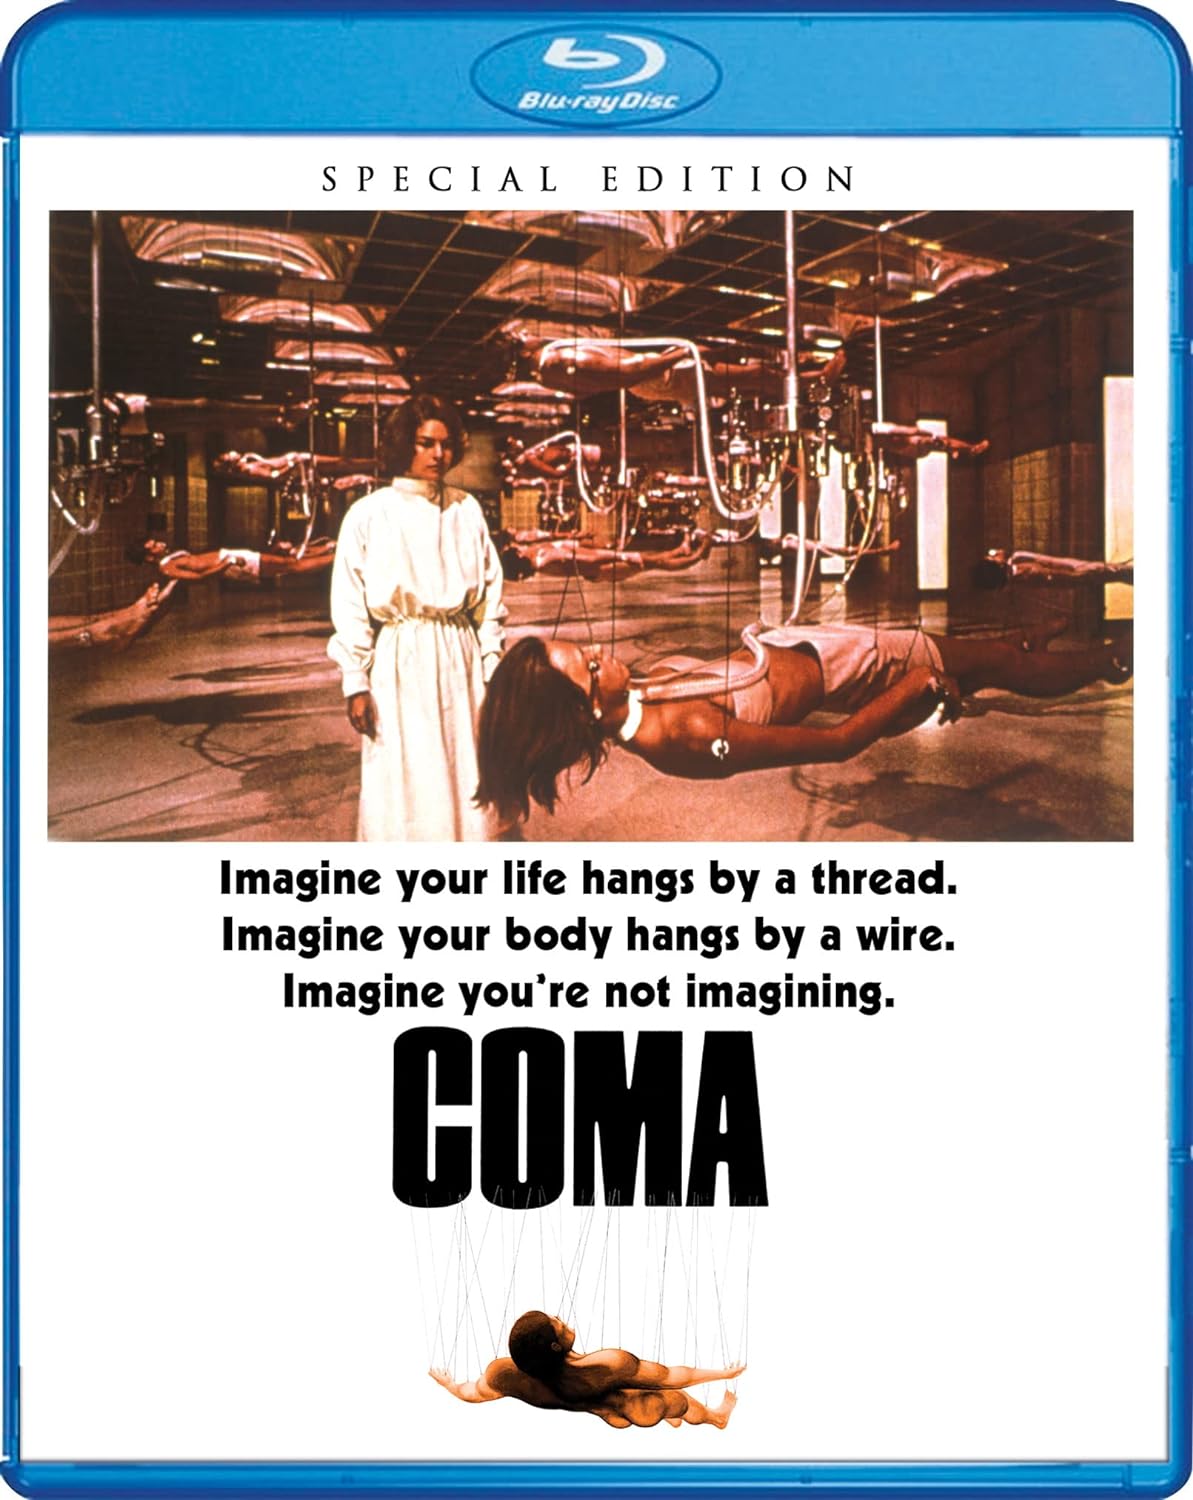 Coma Blu-ray Special Edition with Slipcover (Scream Factory)